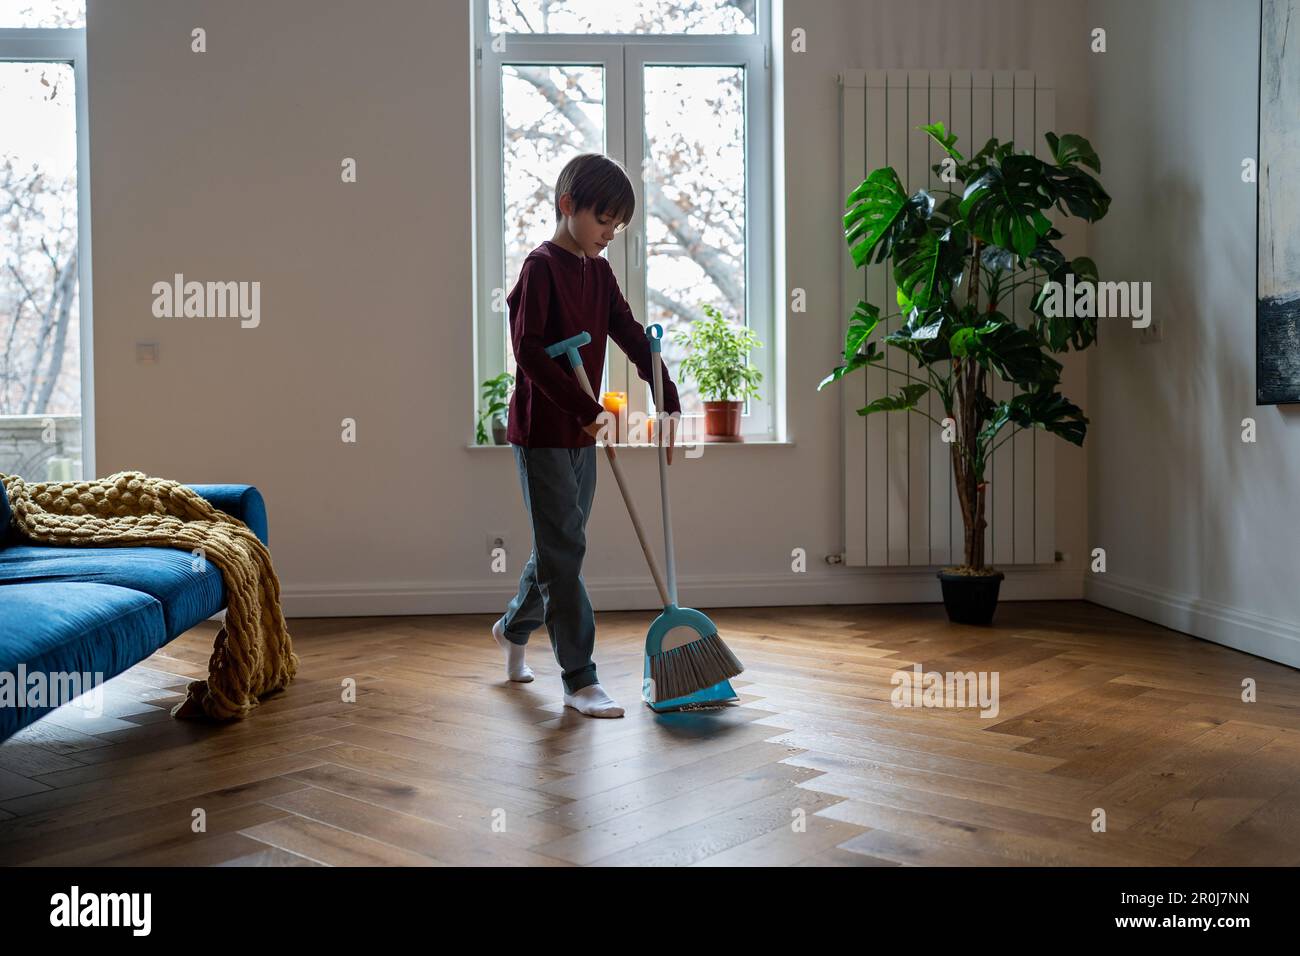 Children Sister and Brother Sweeping Floor with Broom at Home Stock Photo -  Image of clean, child: 219040630